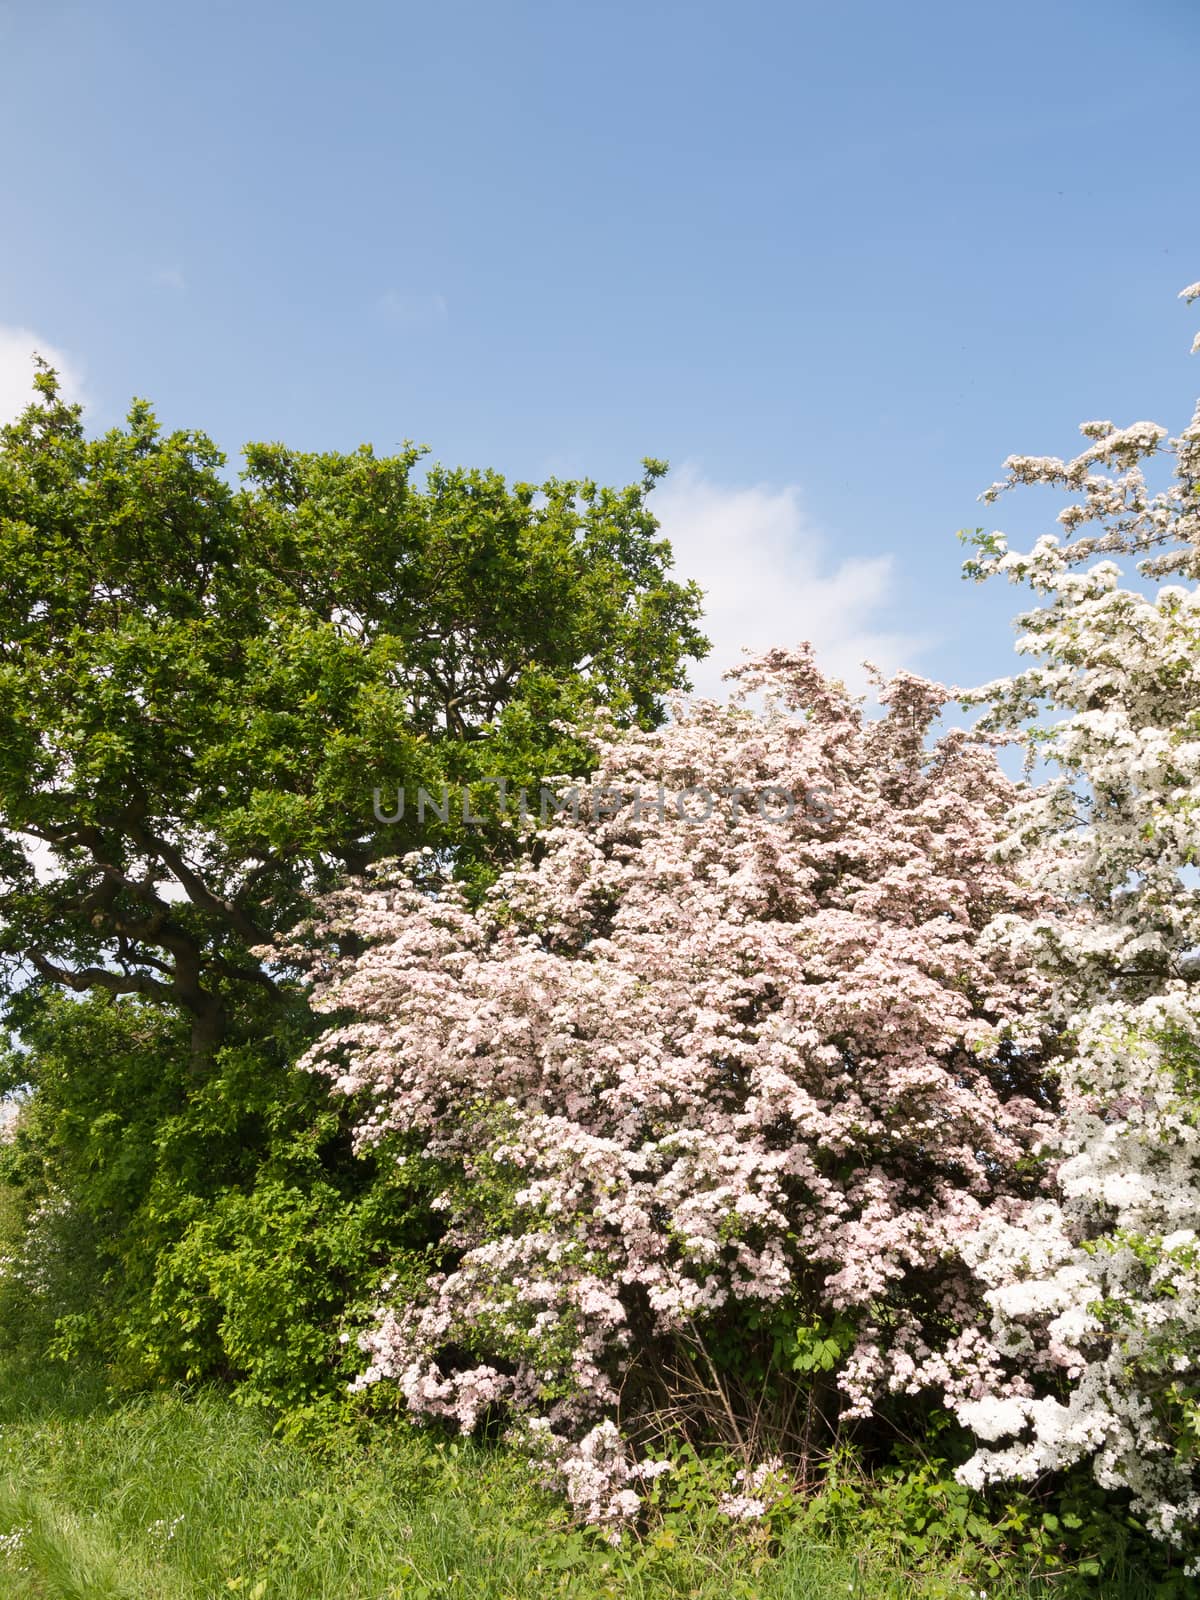 beautiful spring tree with pink white blossom full nature special; essex; england; uk